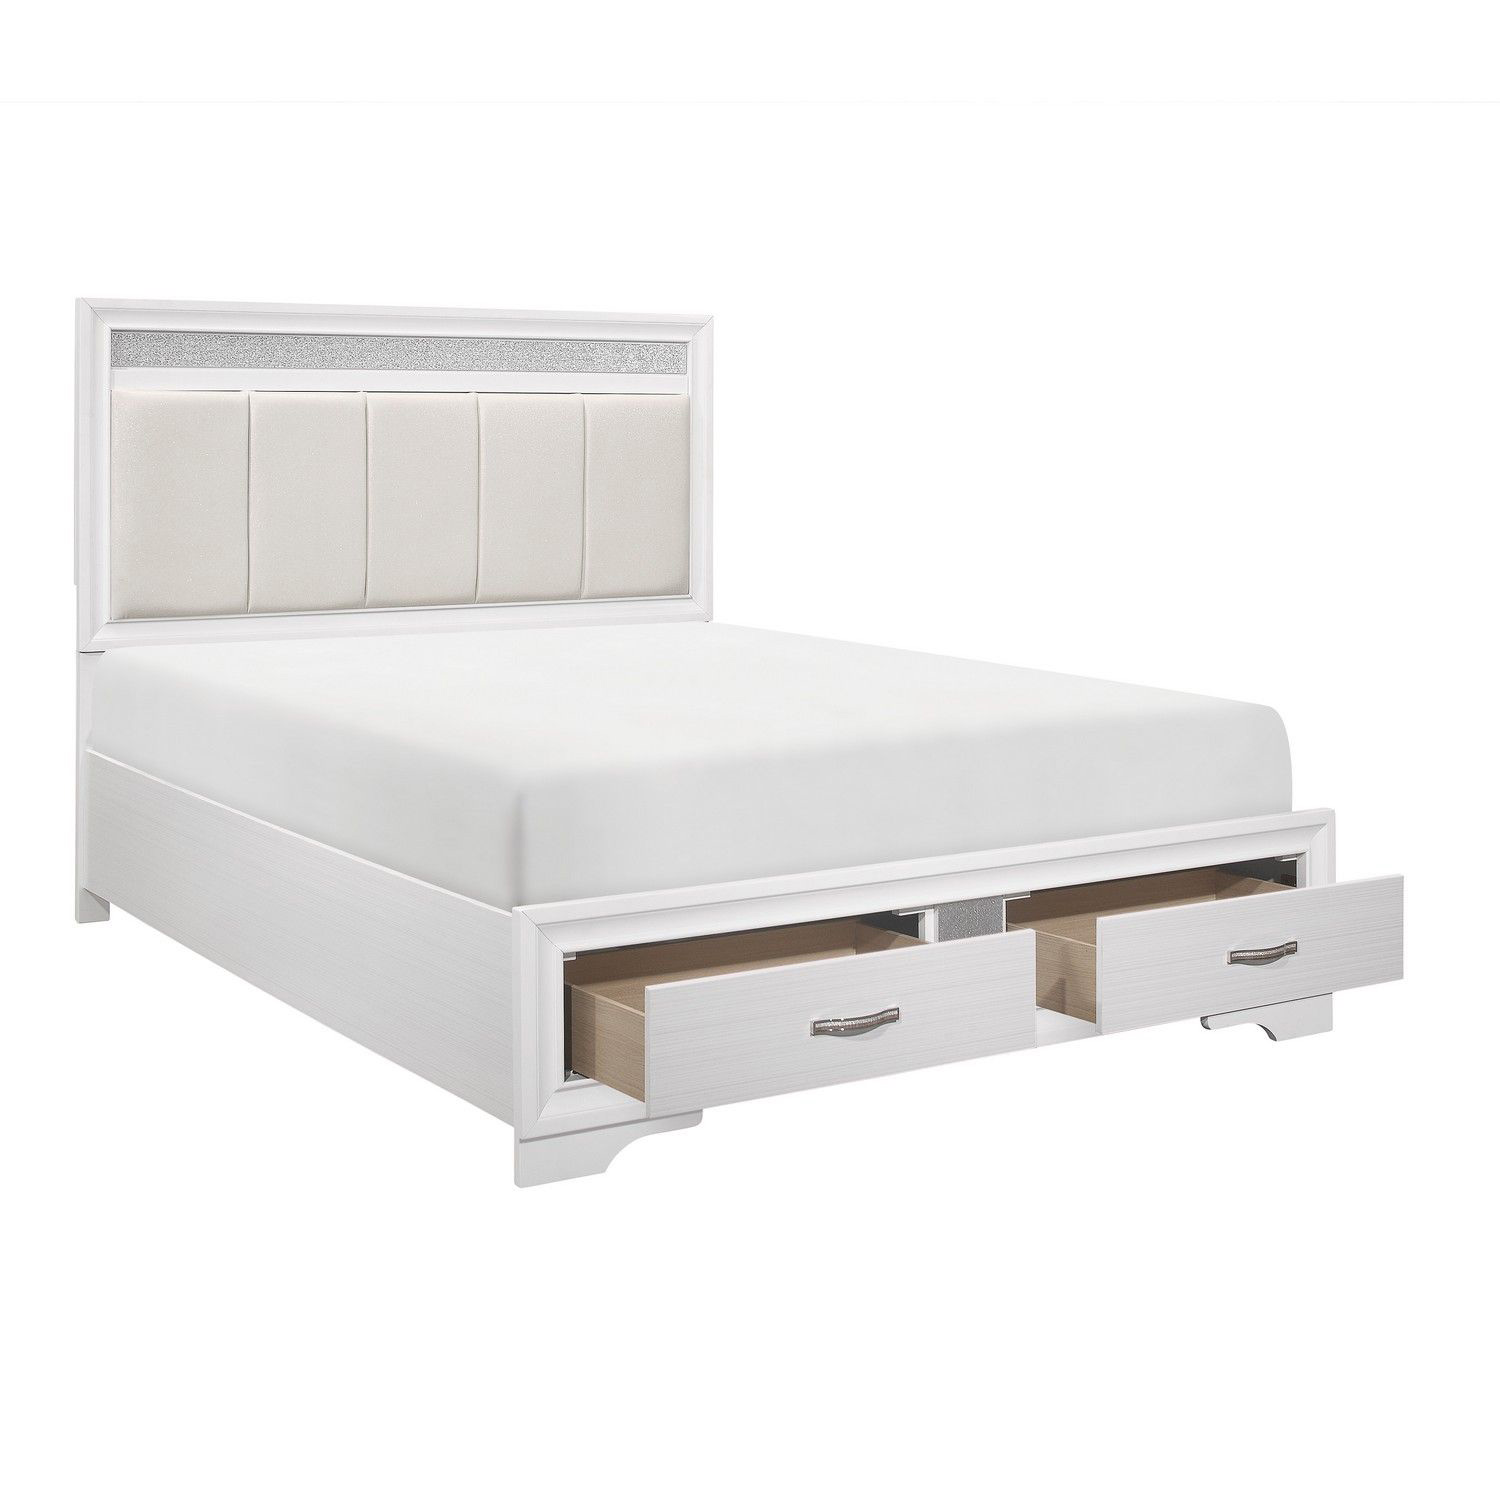 Homelegance Luster Platform Bed - Two-tone : White And Silver Glitter